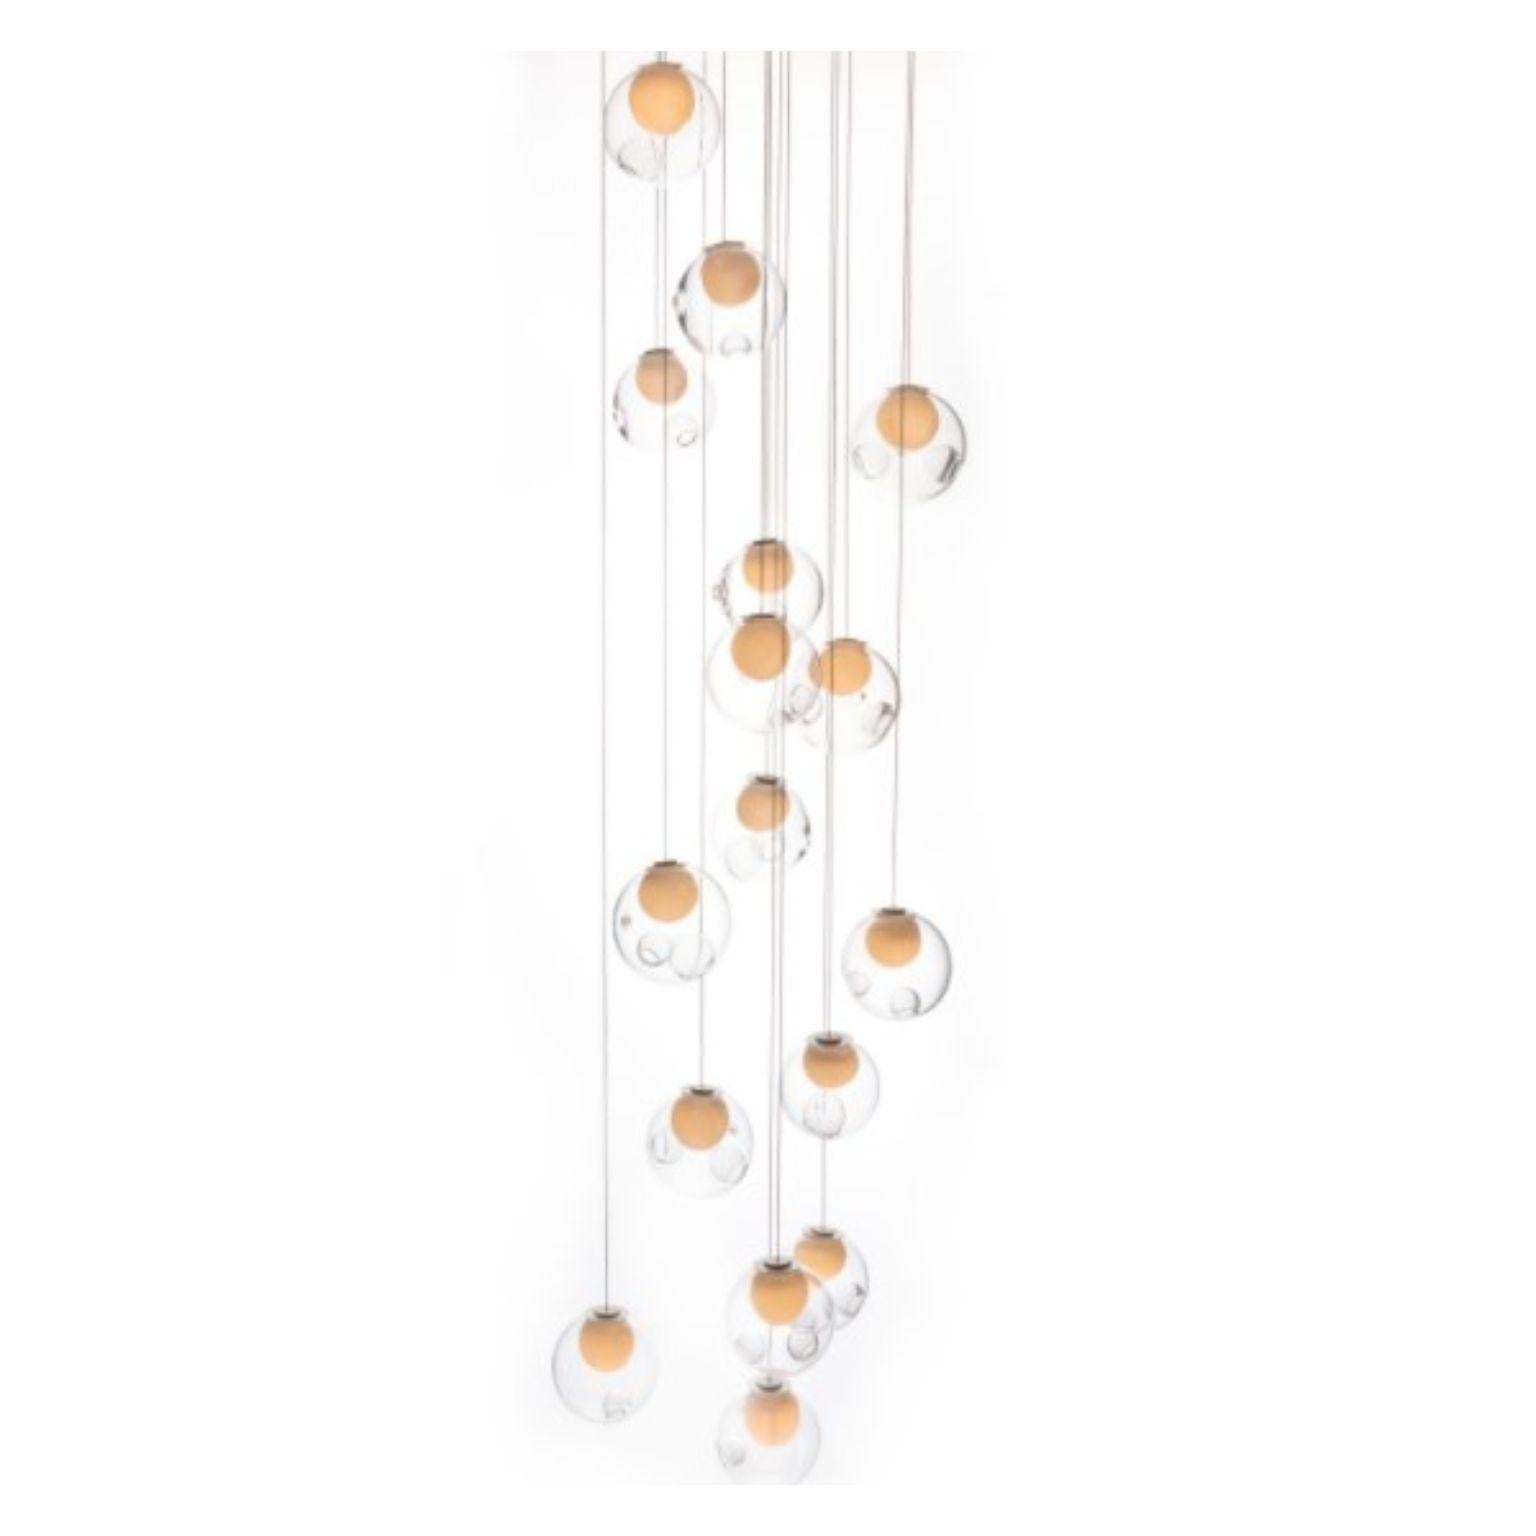 28.16 pendant by Bocci
Dimensions: D 60 x H 300 cm
Materials: diameter brushed nickel canopy
Weight: 39.5 kg
Also Available in different dimensions.

All our lamps can be wired according to each country. If sold to the USA it will be wired for